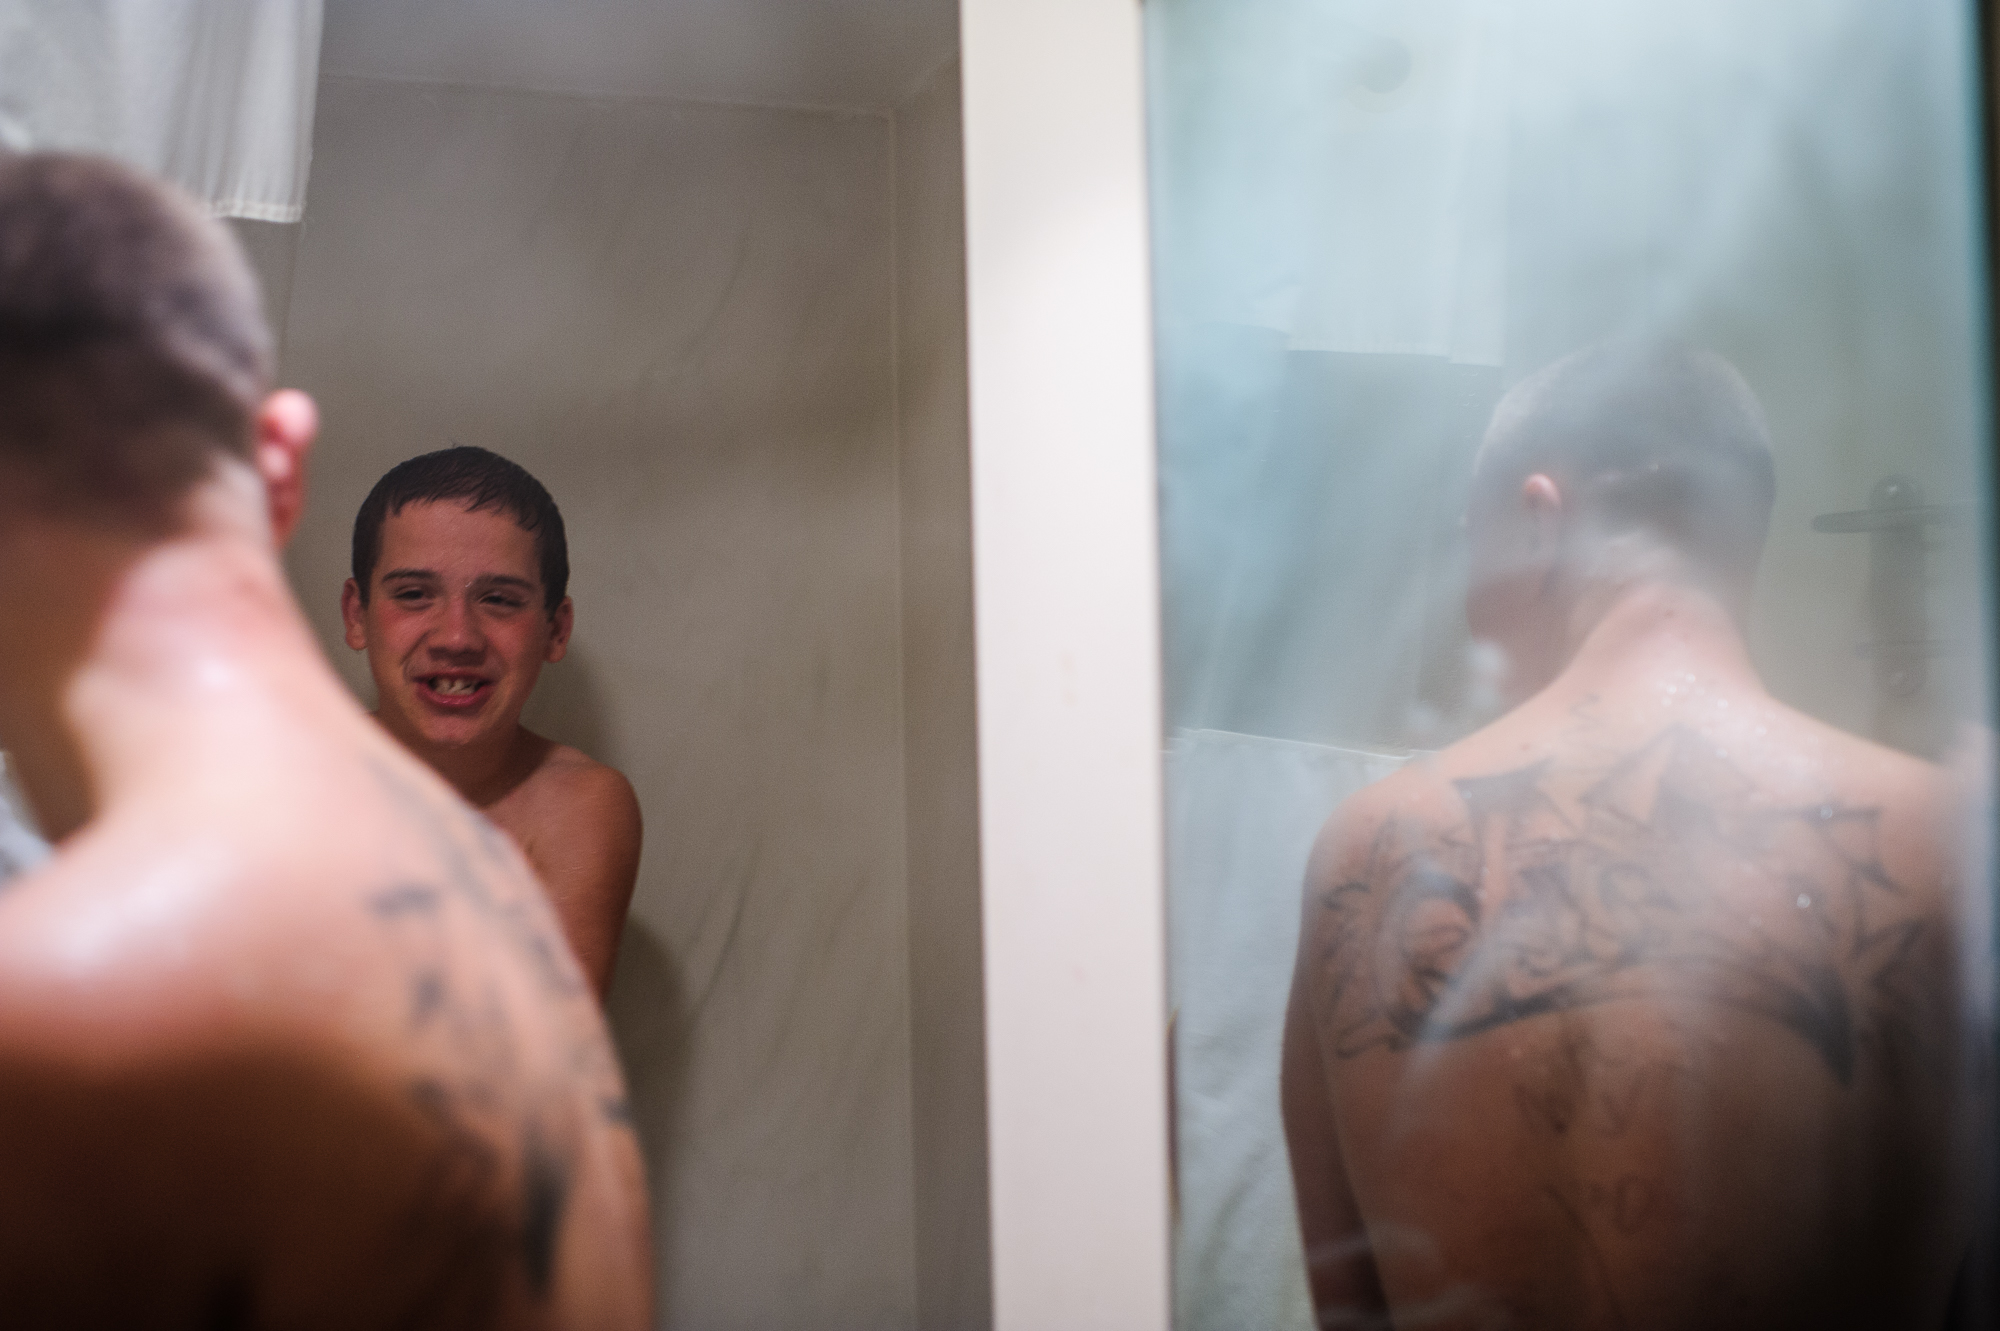  Vinny, age 15, and David, age 21, tease each other while Vinny showers, 2014. 